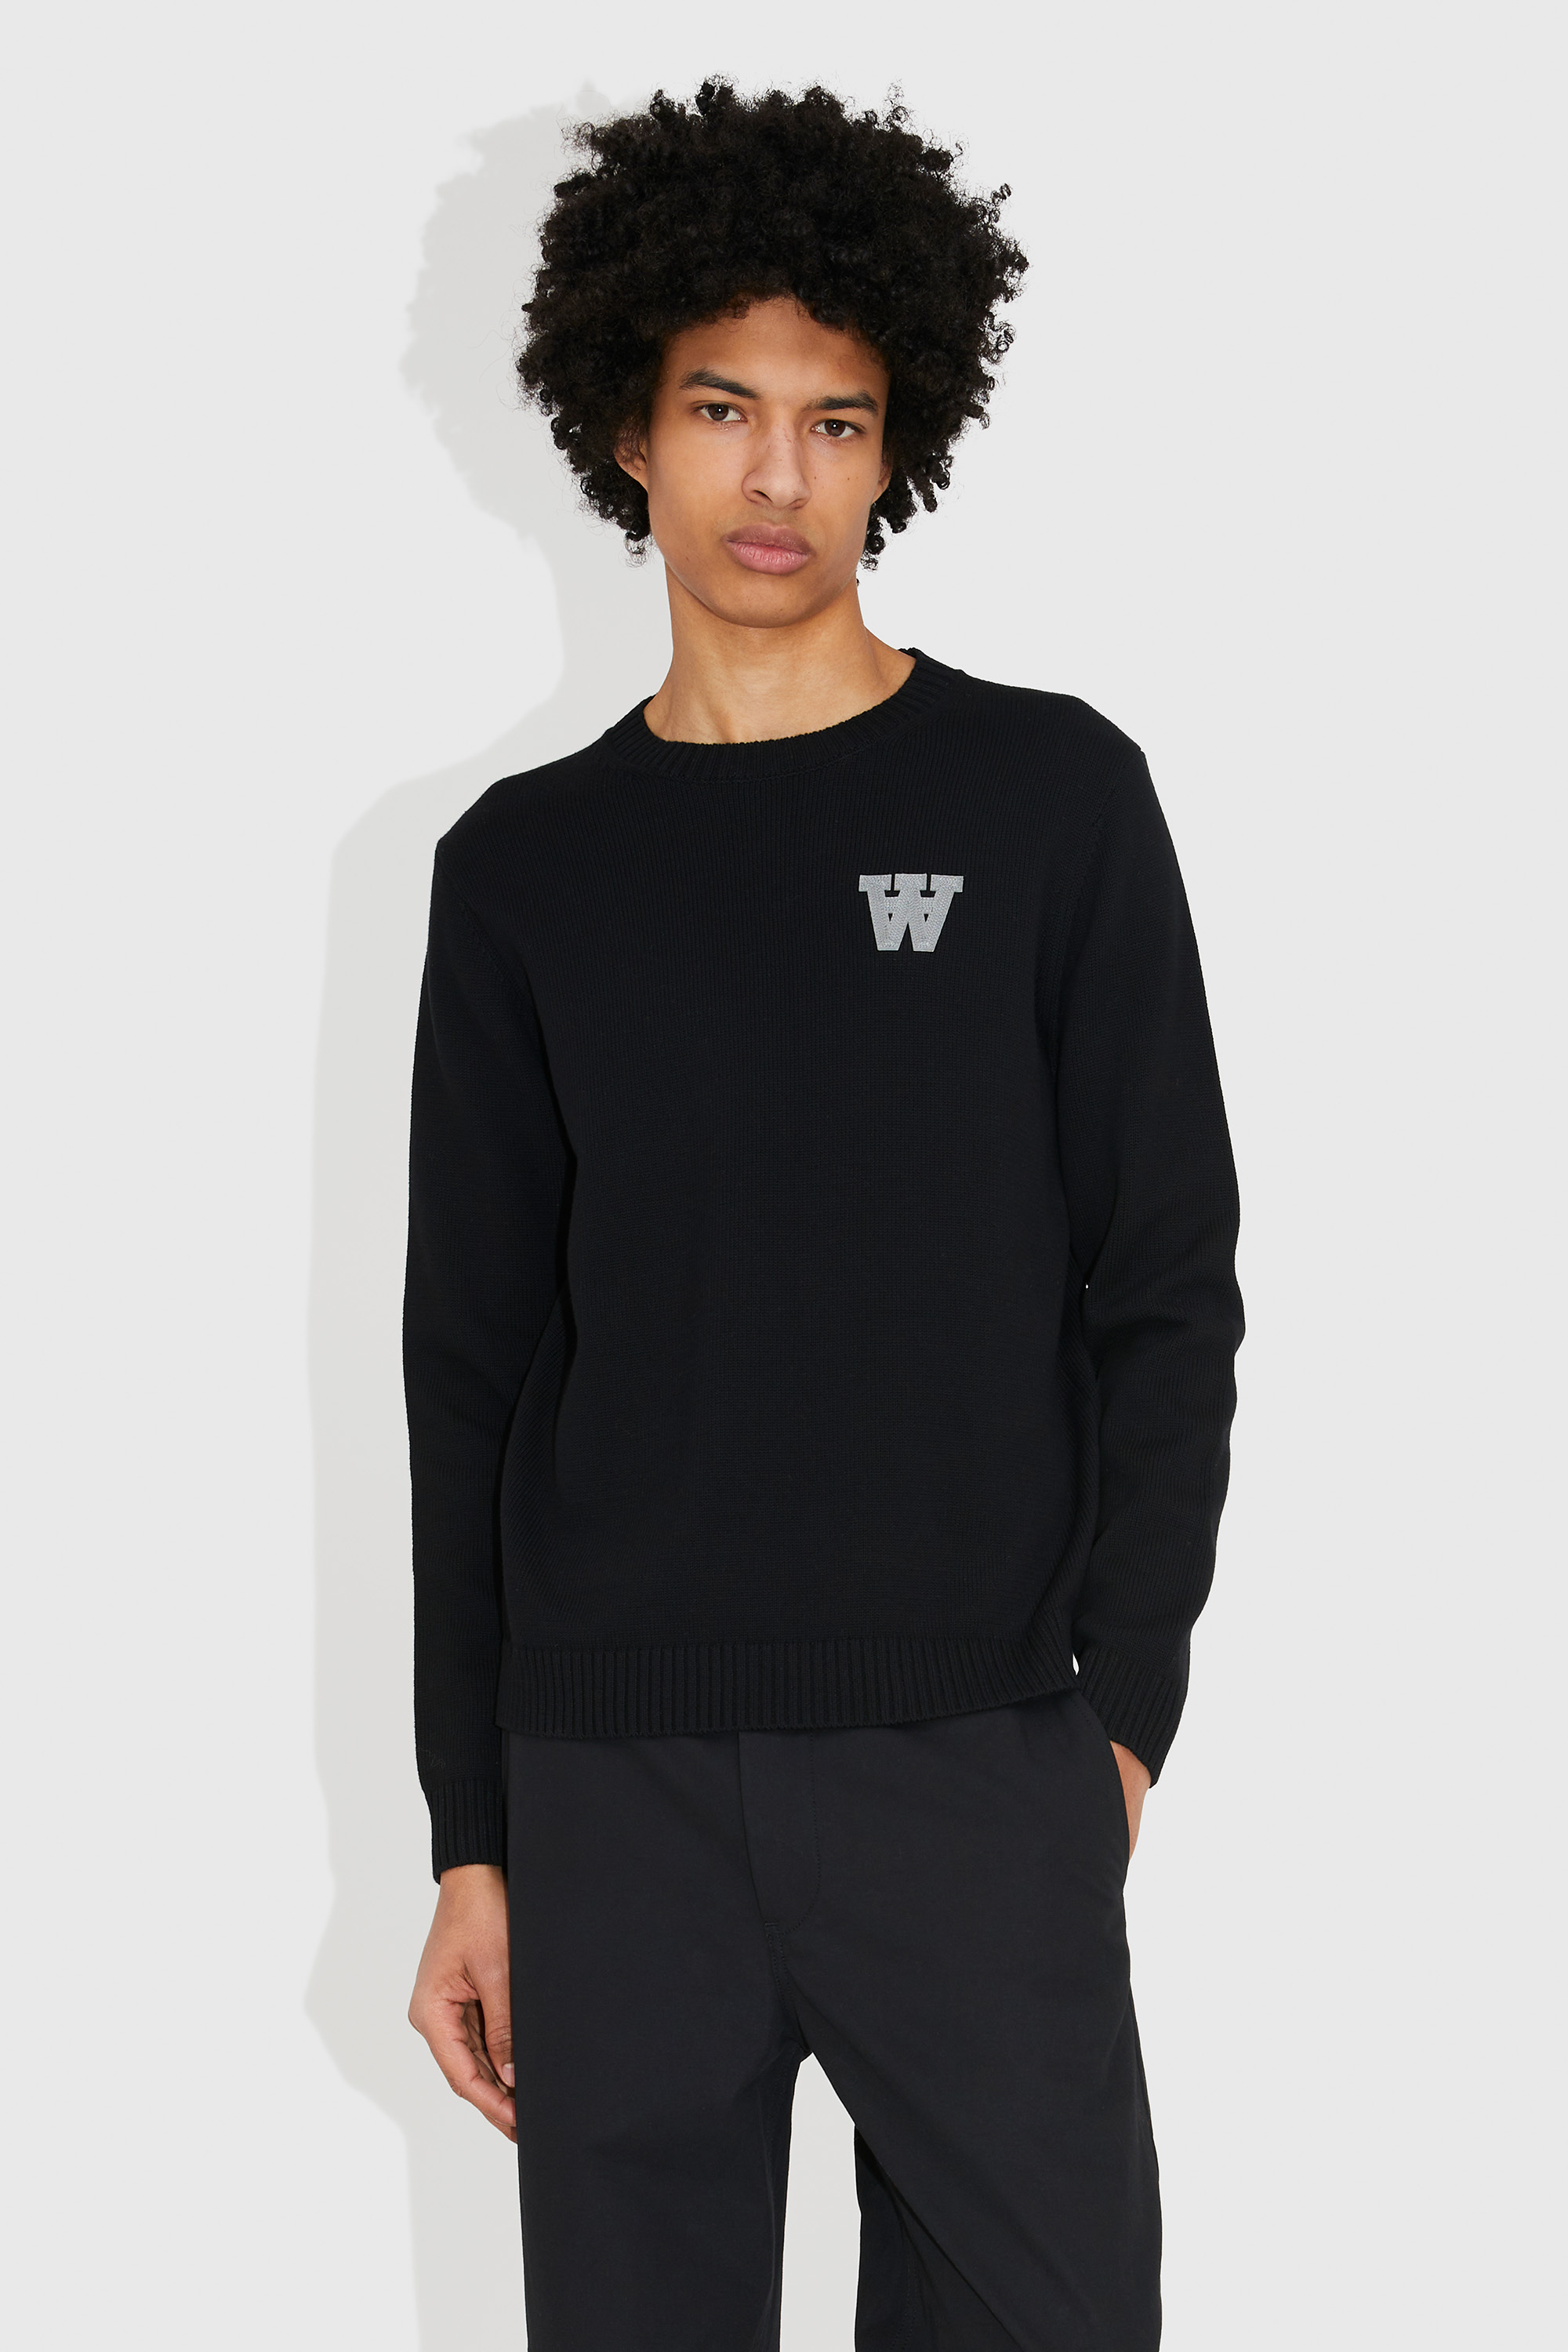 Double A by Wood Wood Tay AA CS Patch Jumper Black | WoodWood.com